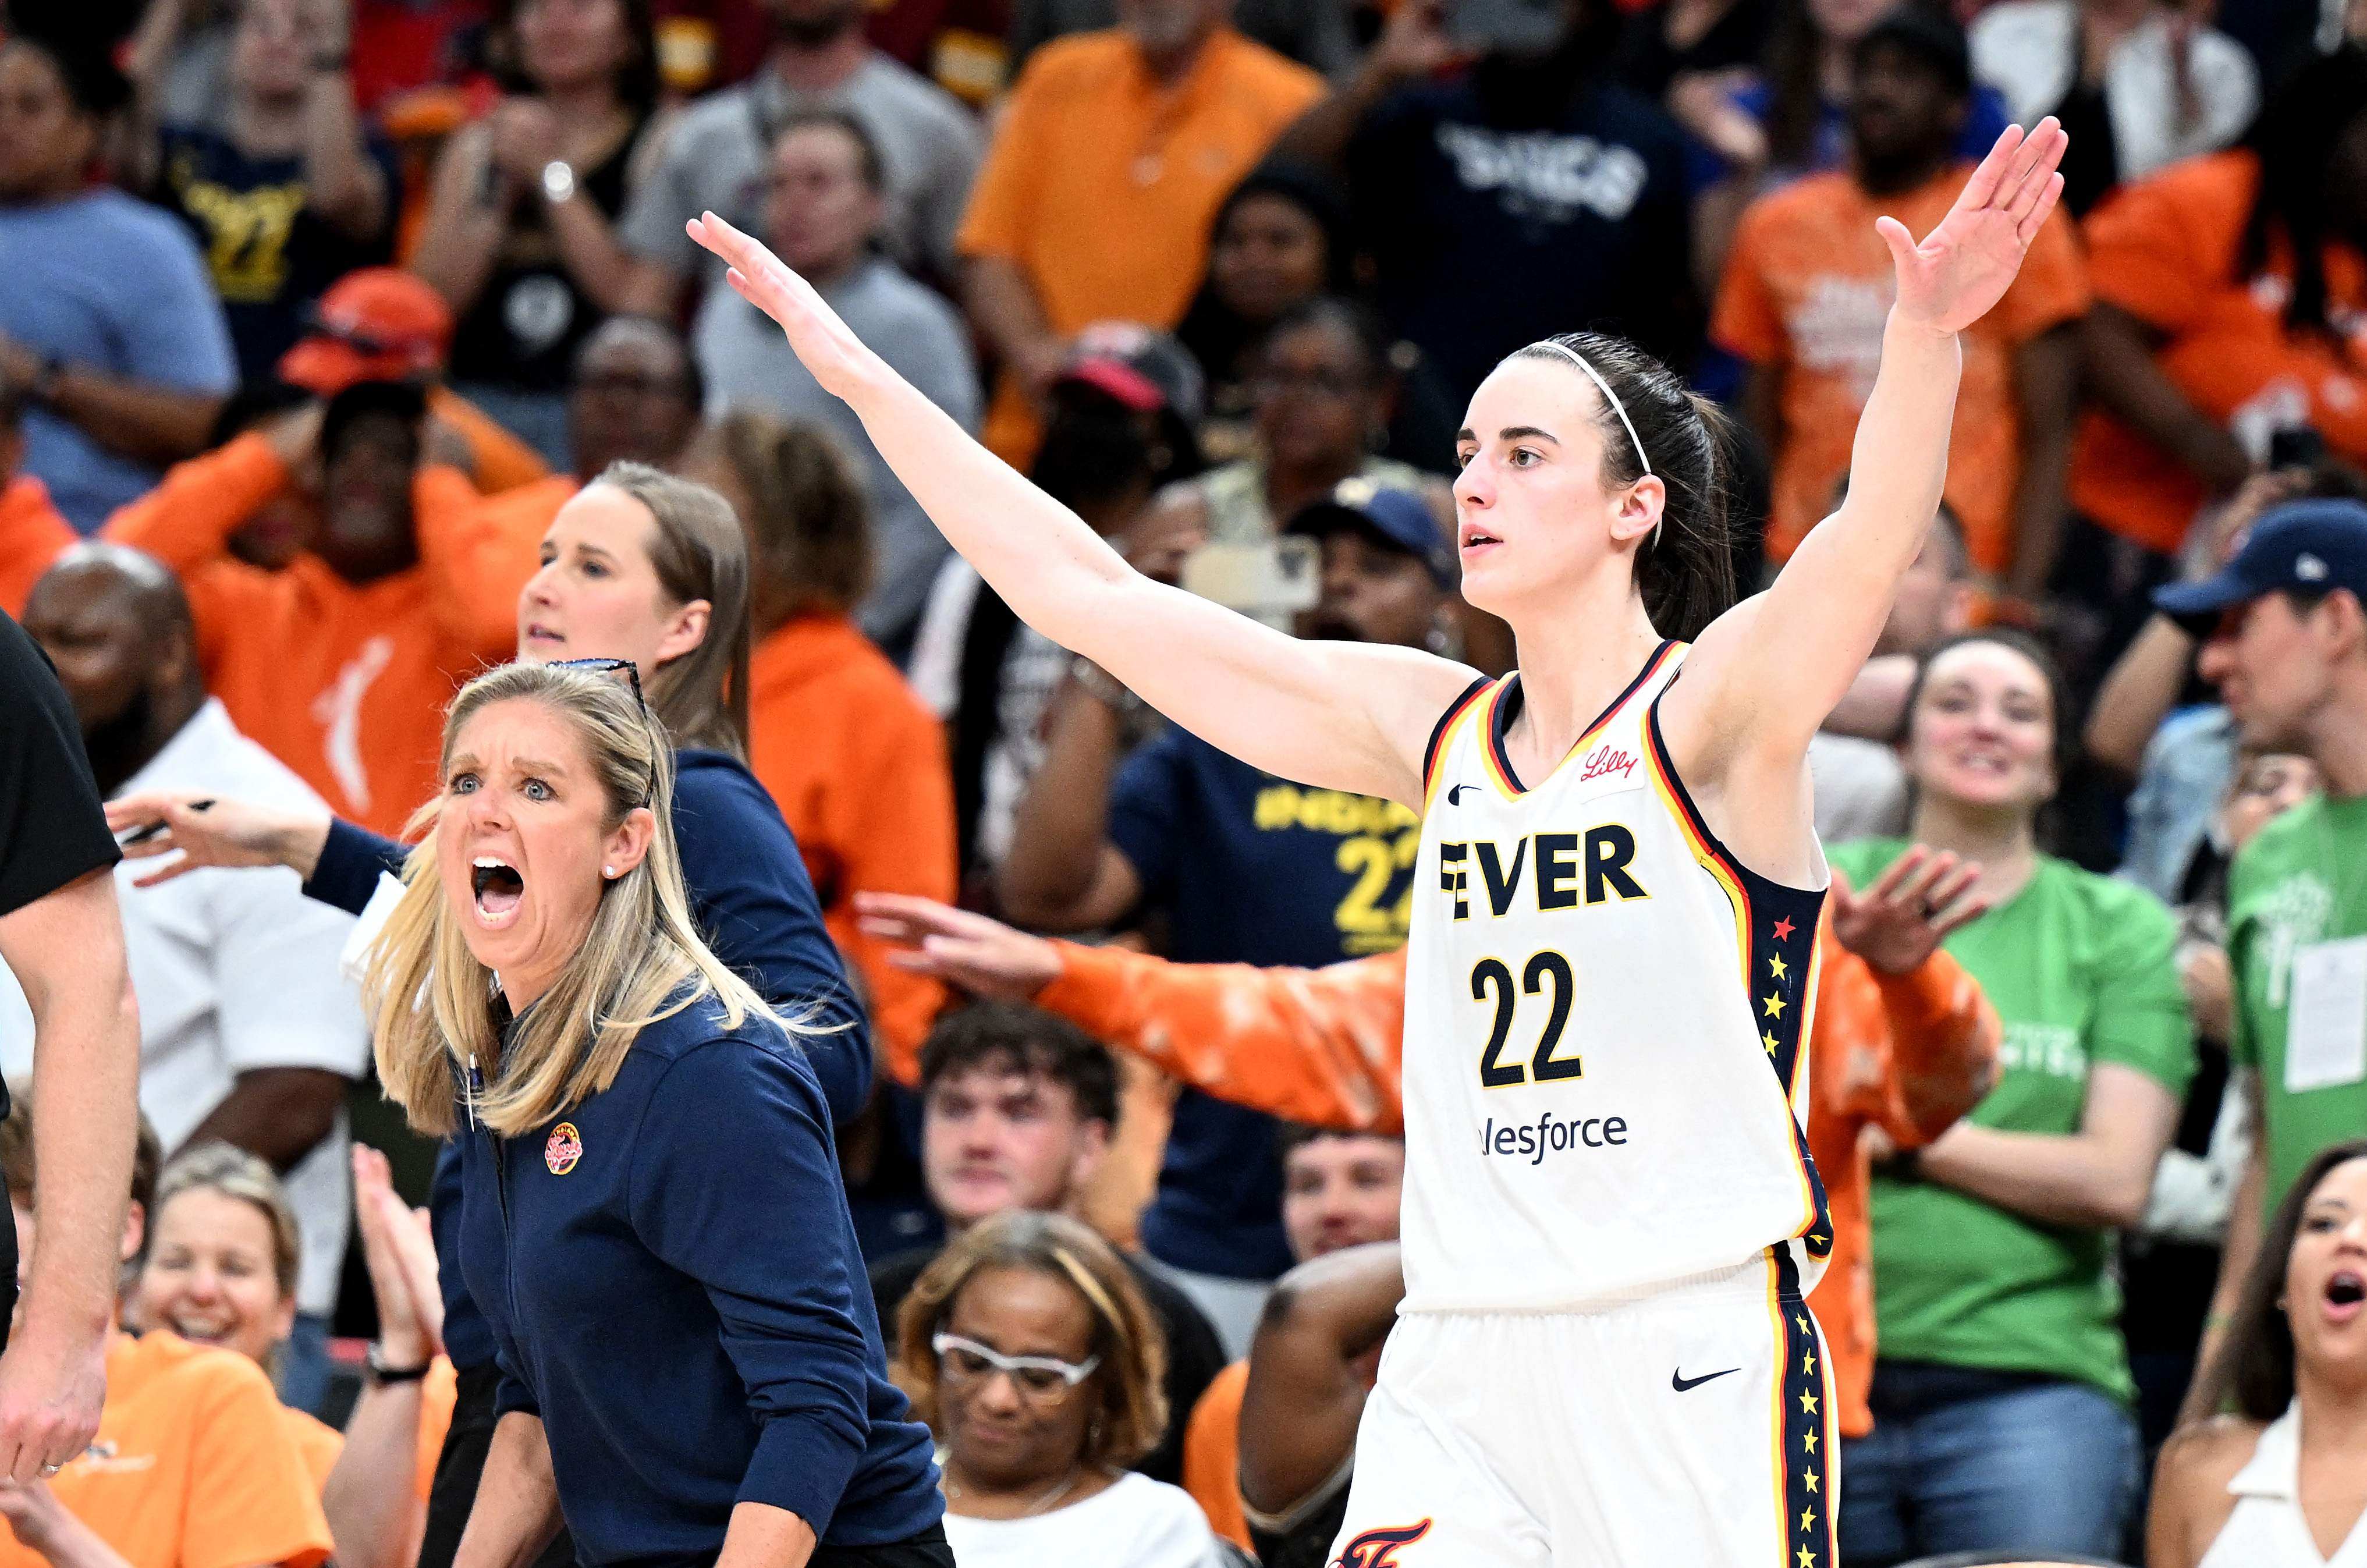 Indian Fever guard Caitlin Clark scored 30 points in her team’s 85-83 win over the Washington Mystics at Capital One Arena on Friday. Photo: Getty Images/AFP